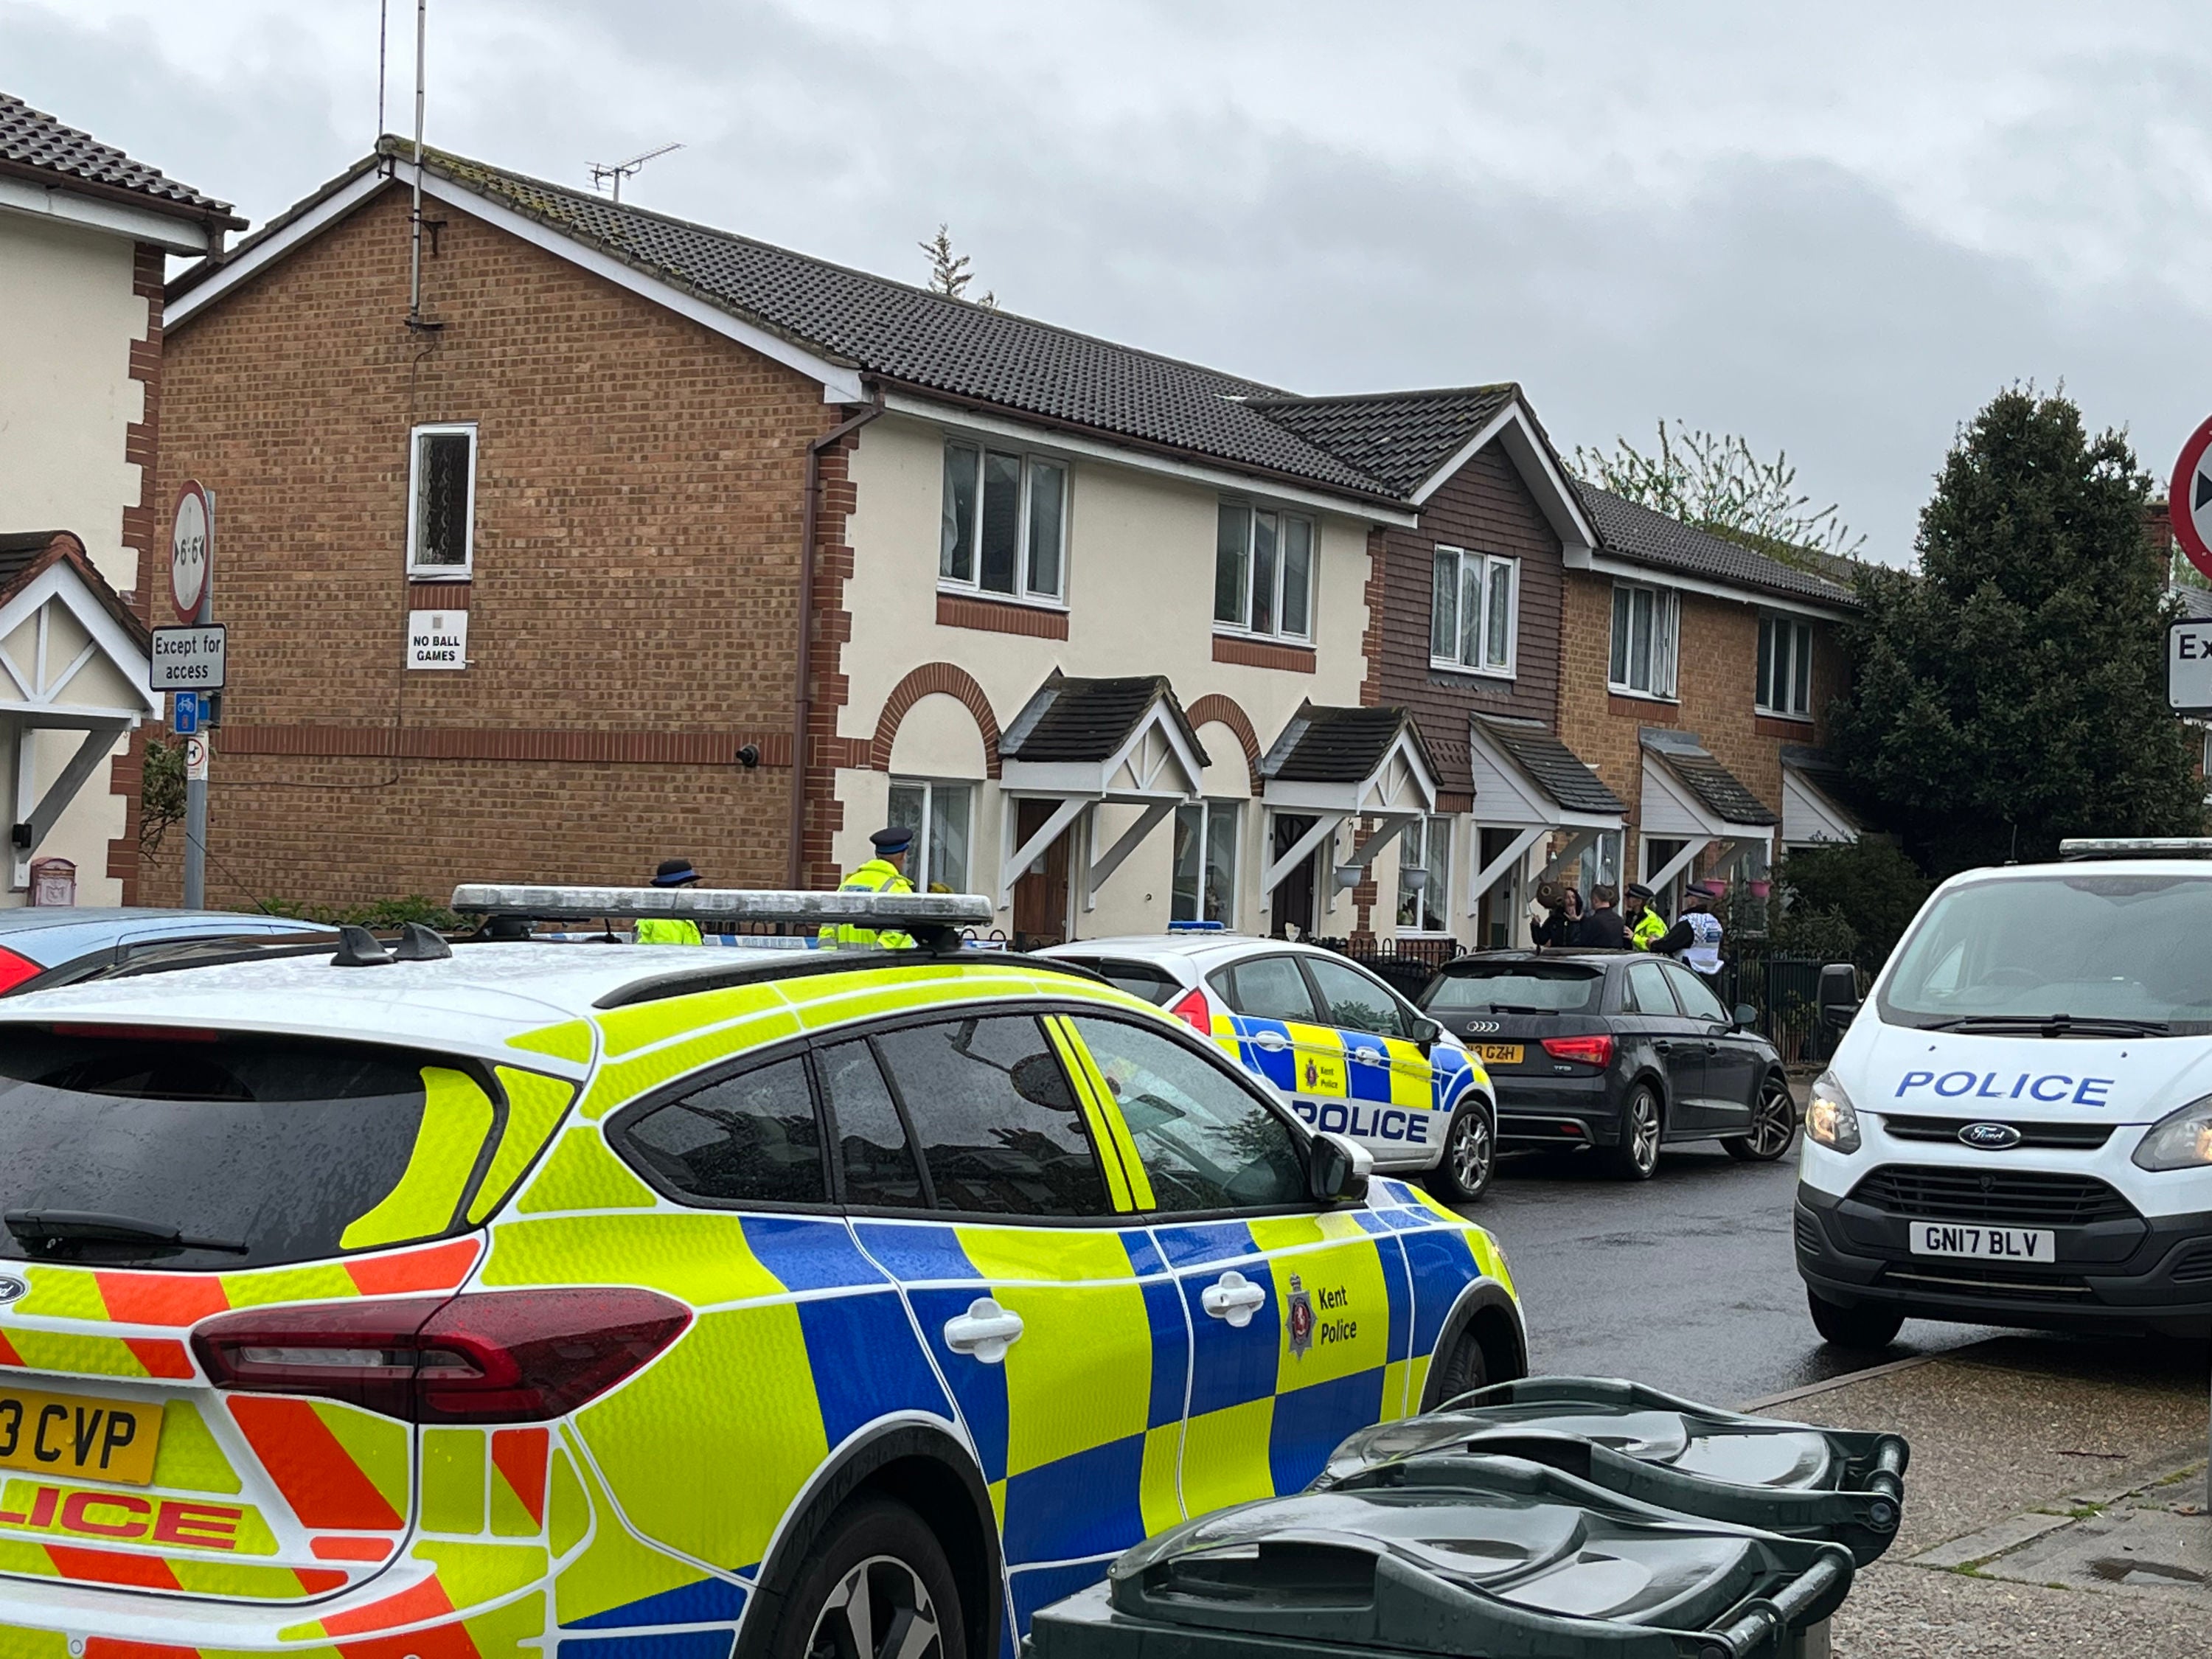 Police officers at the scene in Priory Road, Dartford, Kent, a woman has been rushed to hospital with serious injuries after being held hostage at her home, witnesses have said.